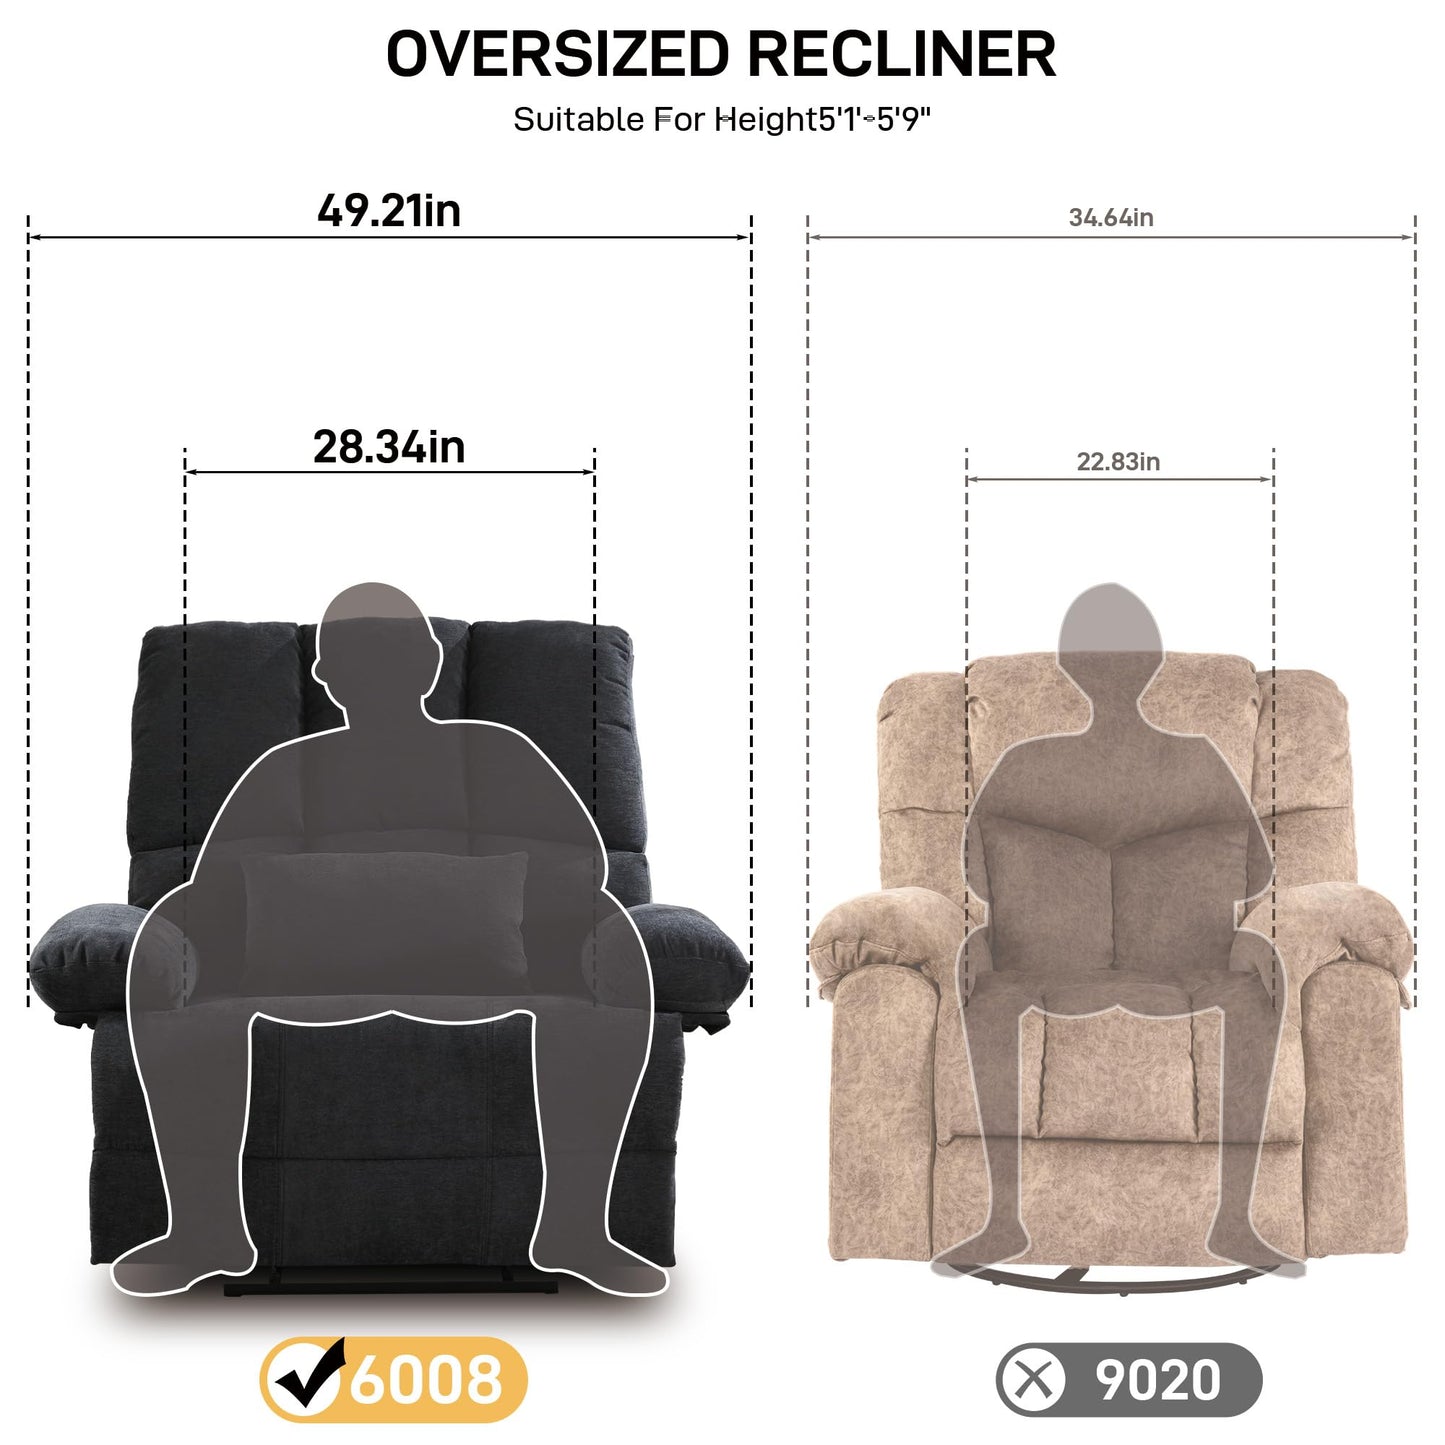 HOMYEDAMIC Oversized Recliner Chair 350 lb Weight Capacity, Plus Size 28 inch Large Wide Seat Manual Comfortable Fabric Recliner for Adults Living Room with Pockets Massage Heated Pillow (6008-Grey)